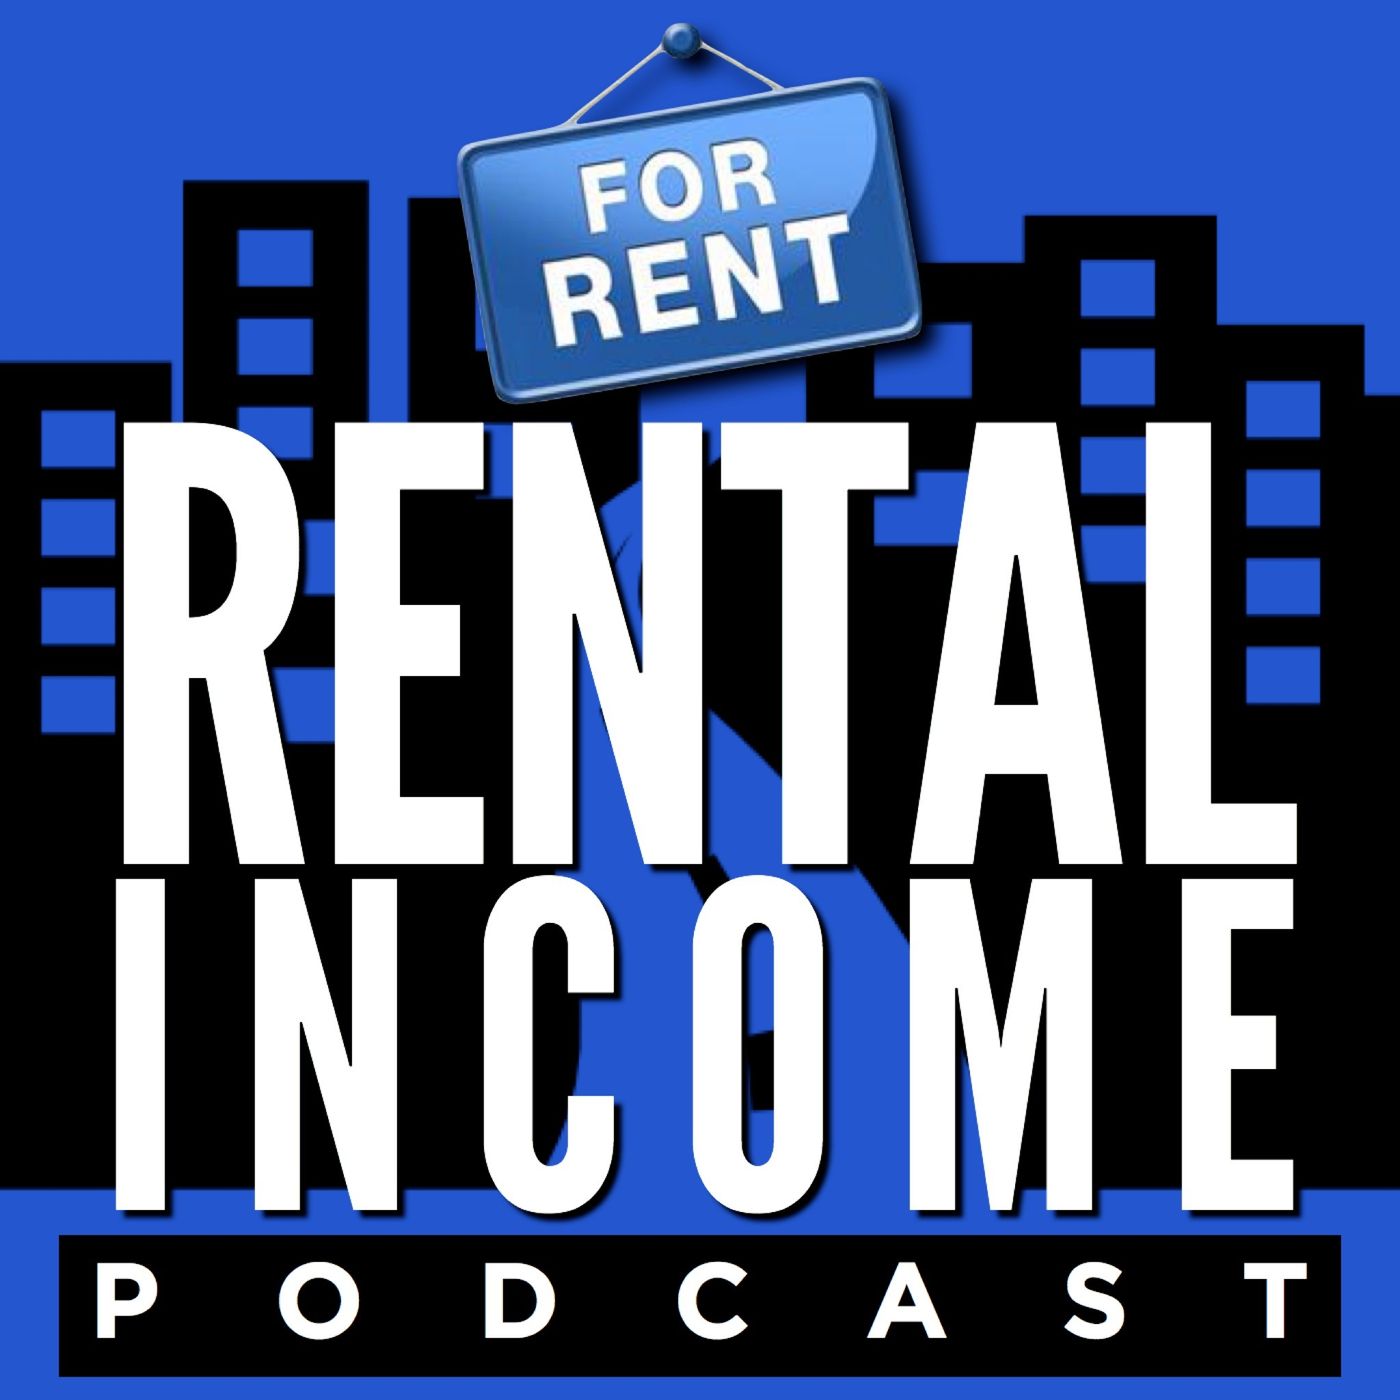 He Got Laid Off And Replaced His Income With A Small Rental Portfolio (Ep 248)